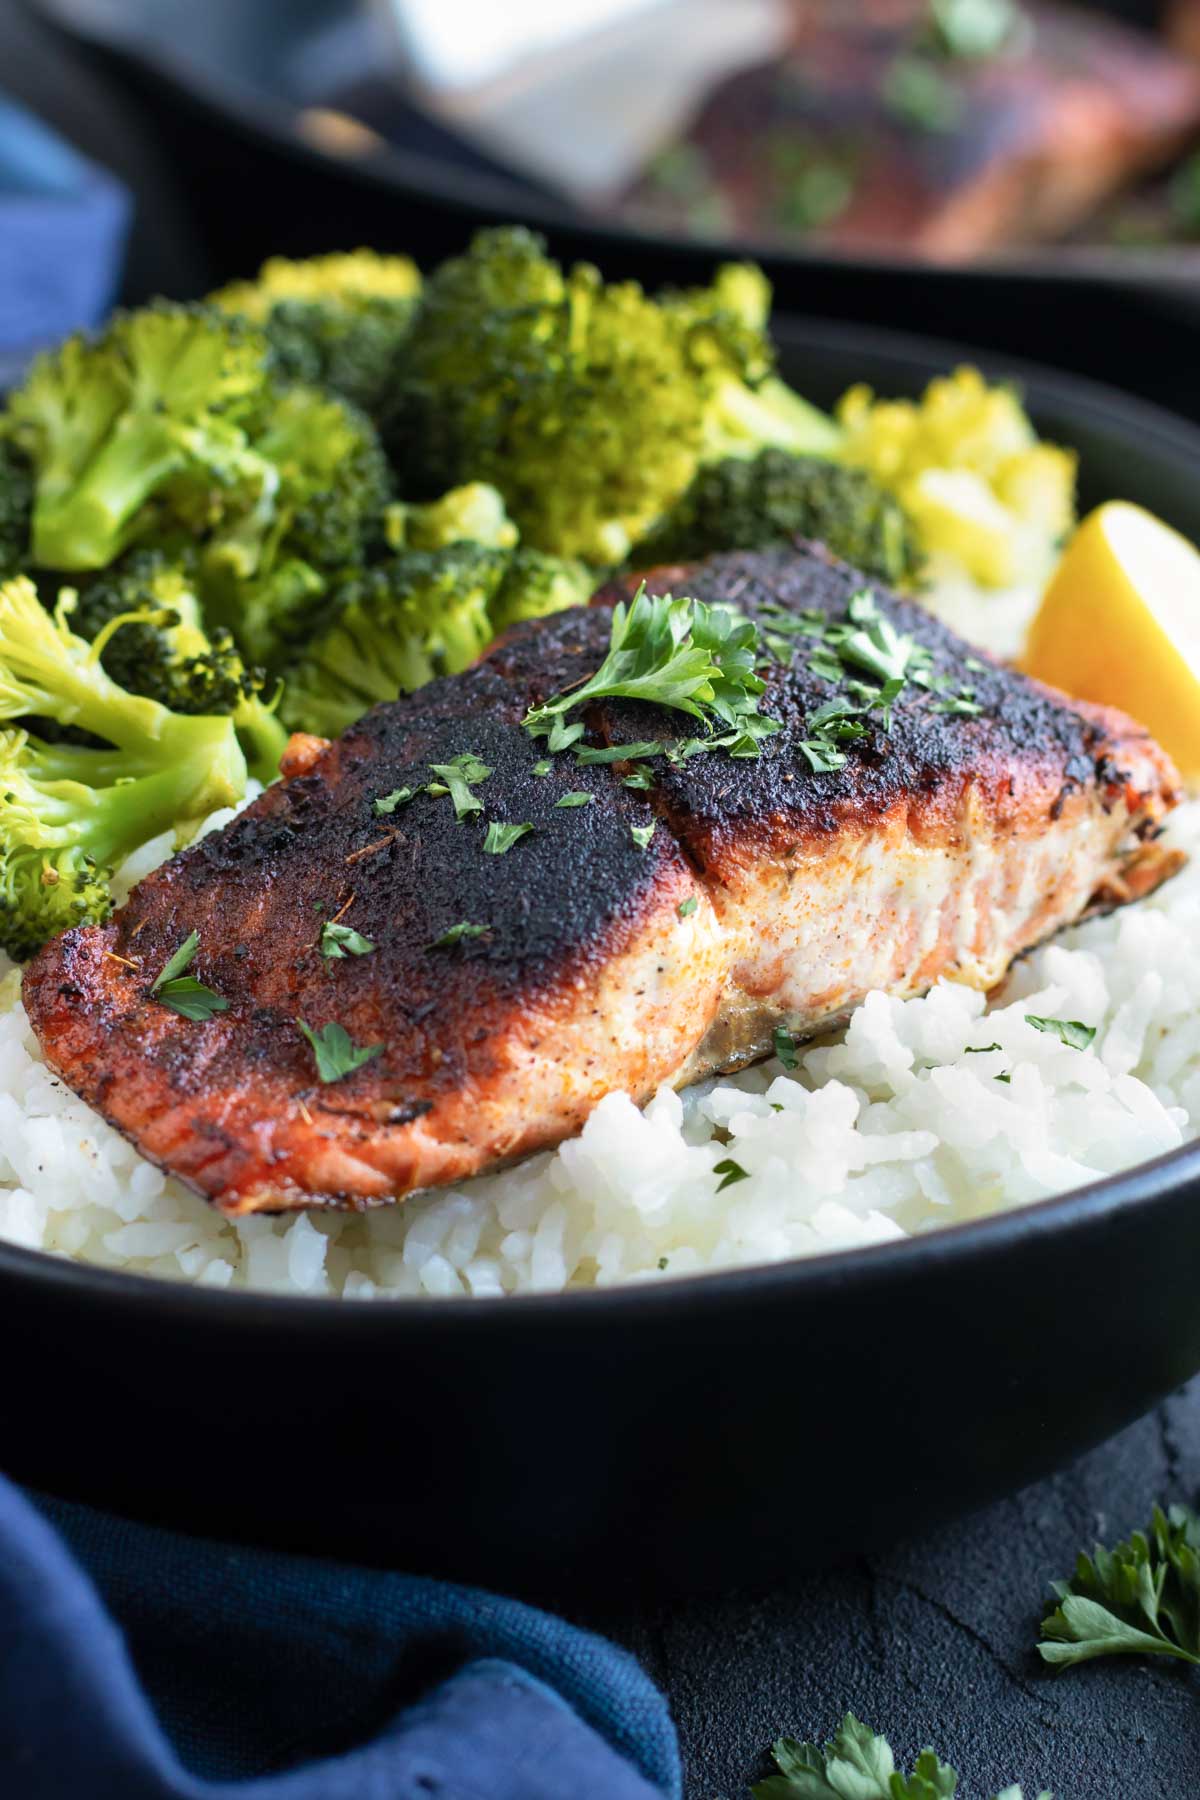 Baked salmon with blackened seasoning over a bed of rice with steamed broccoli in a black bowl.